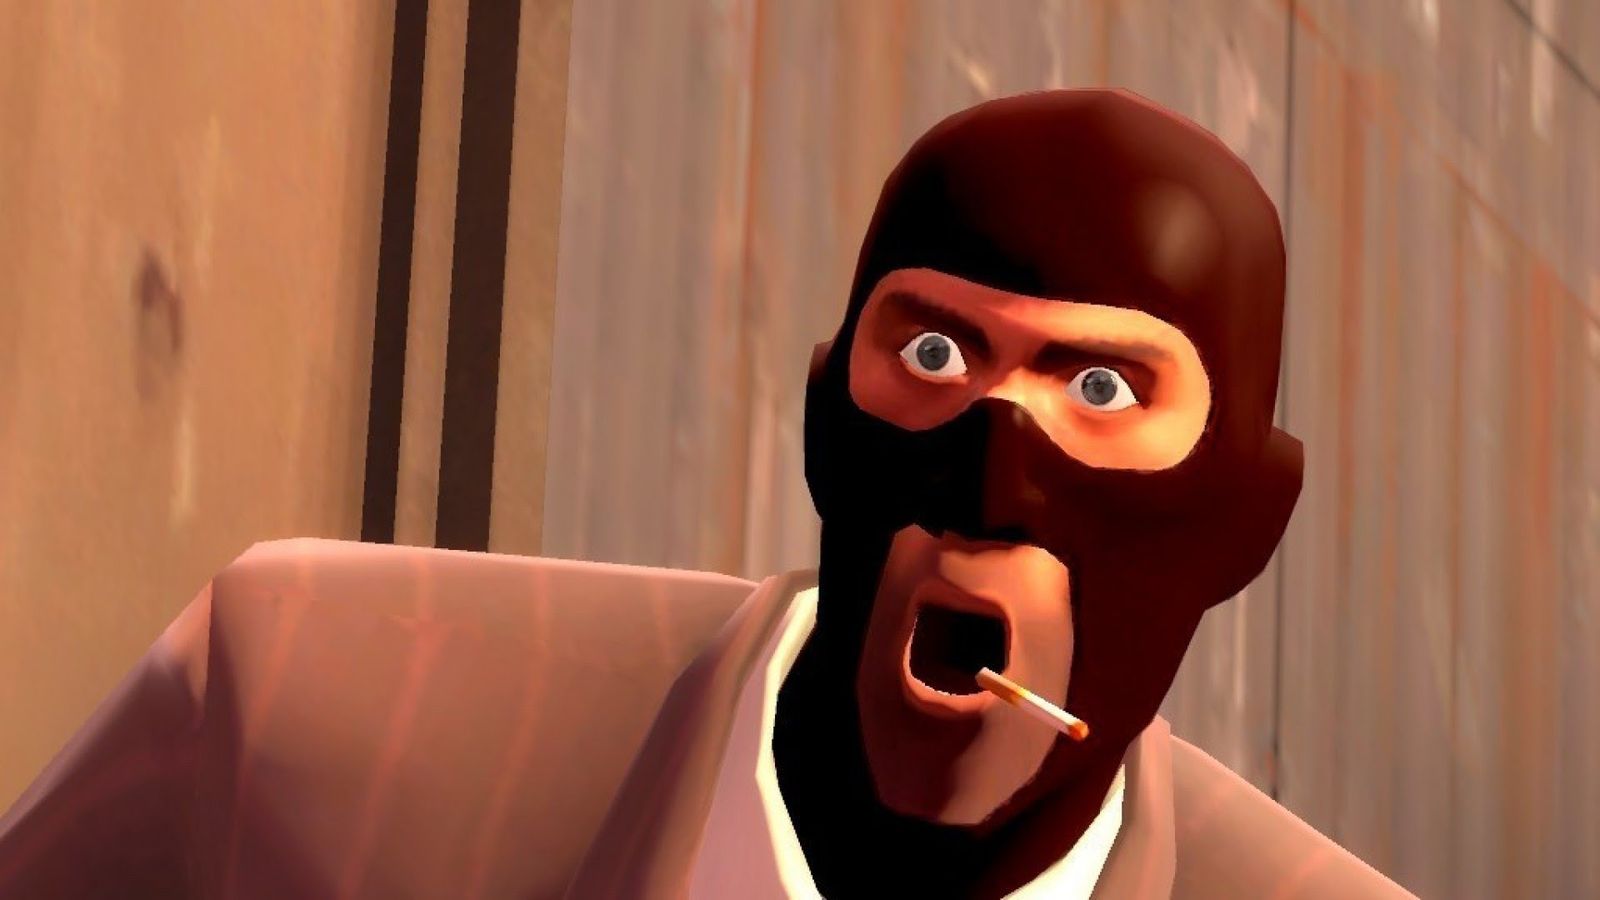 Steam punished users for marking negative reviews as helpful spy looking shocked